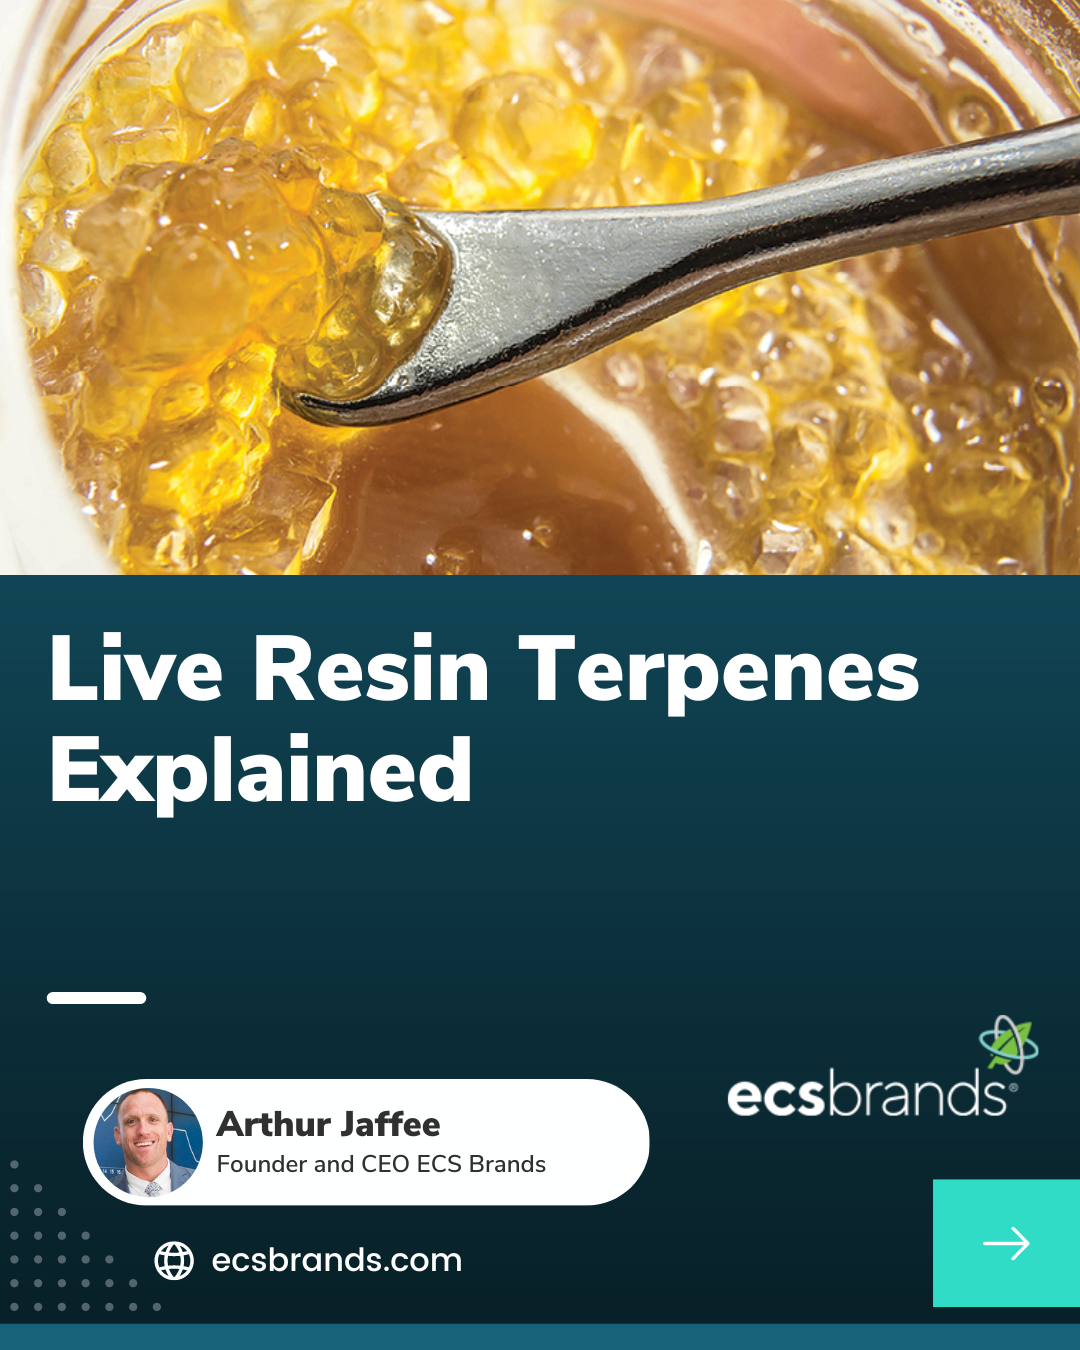 Live Resin Terpenes Explained